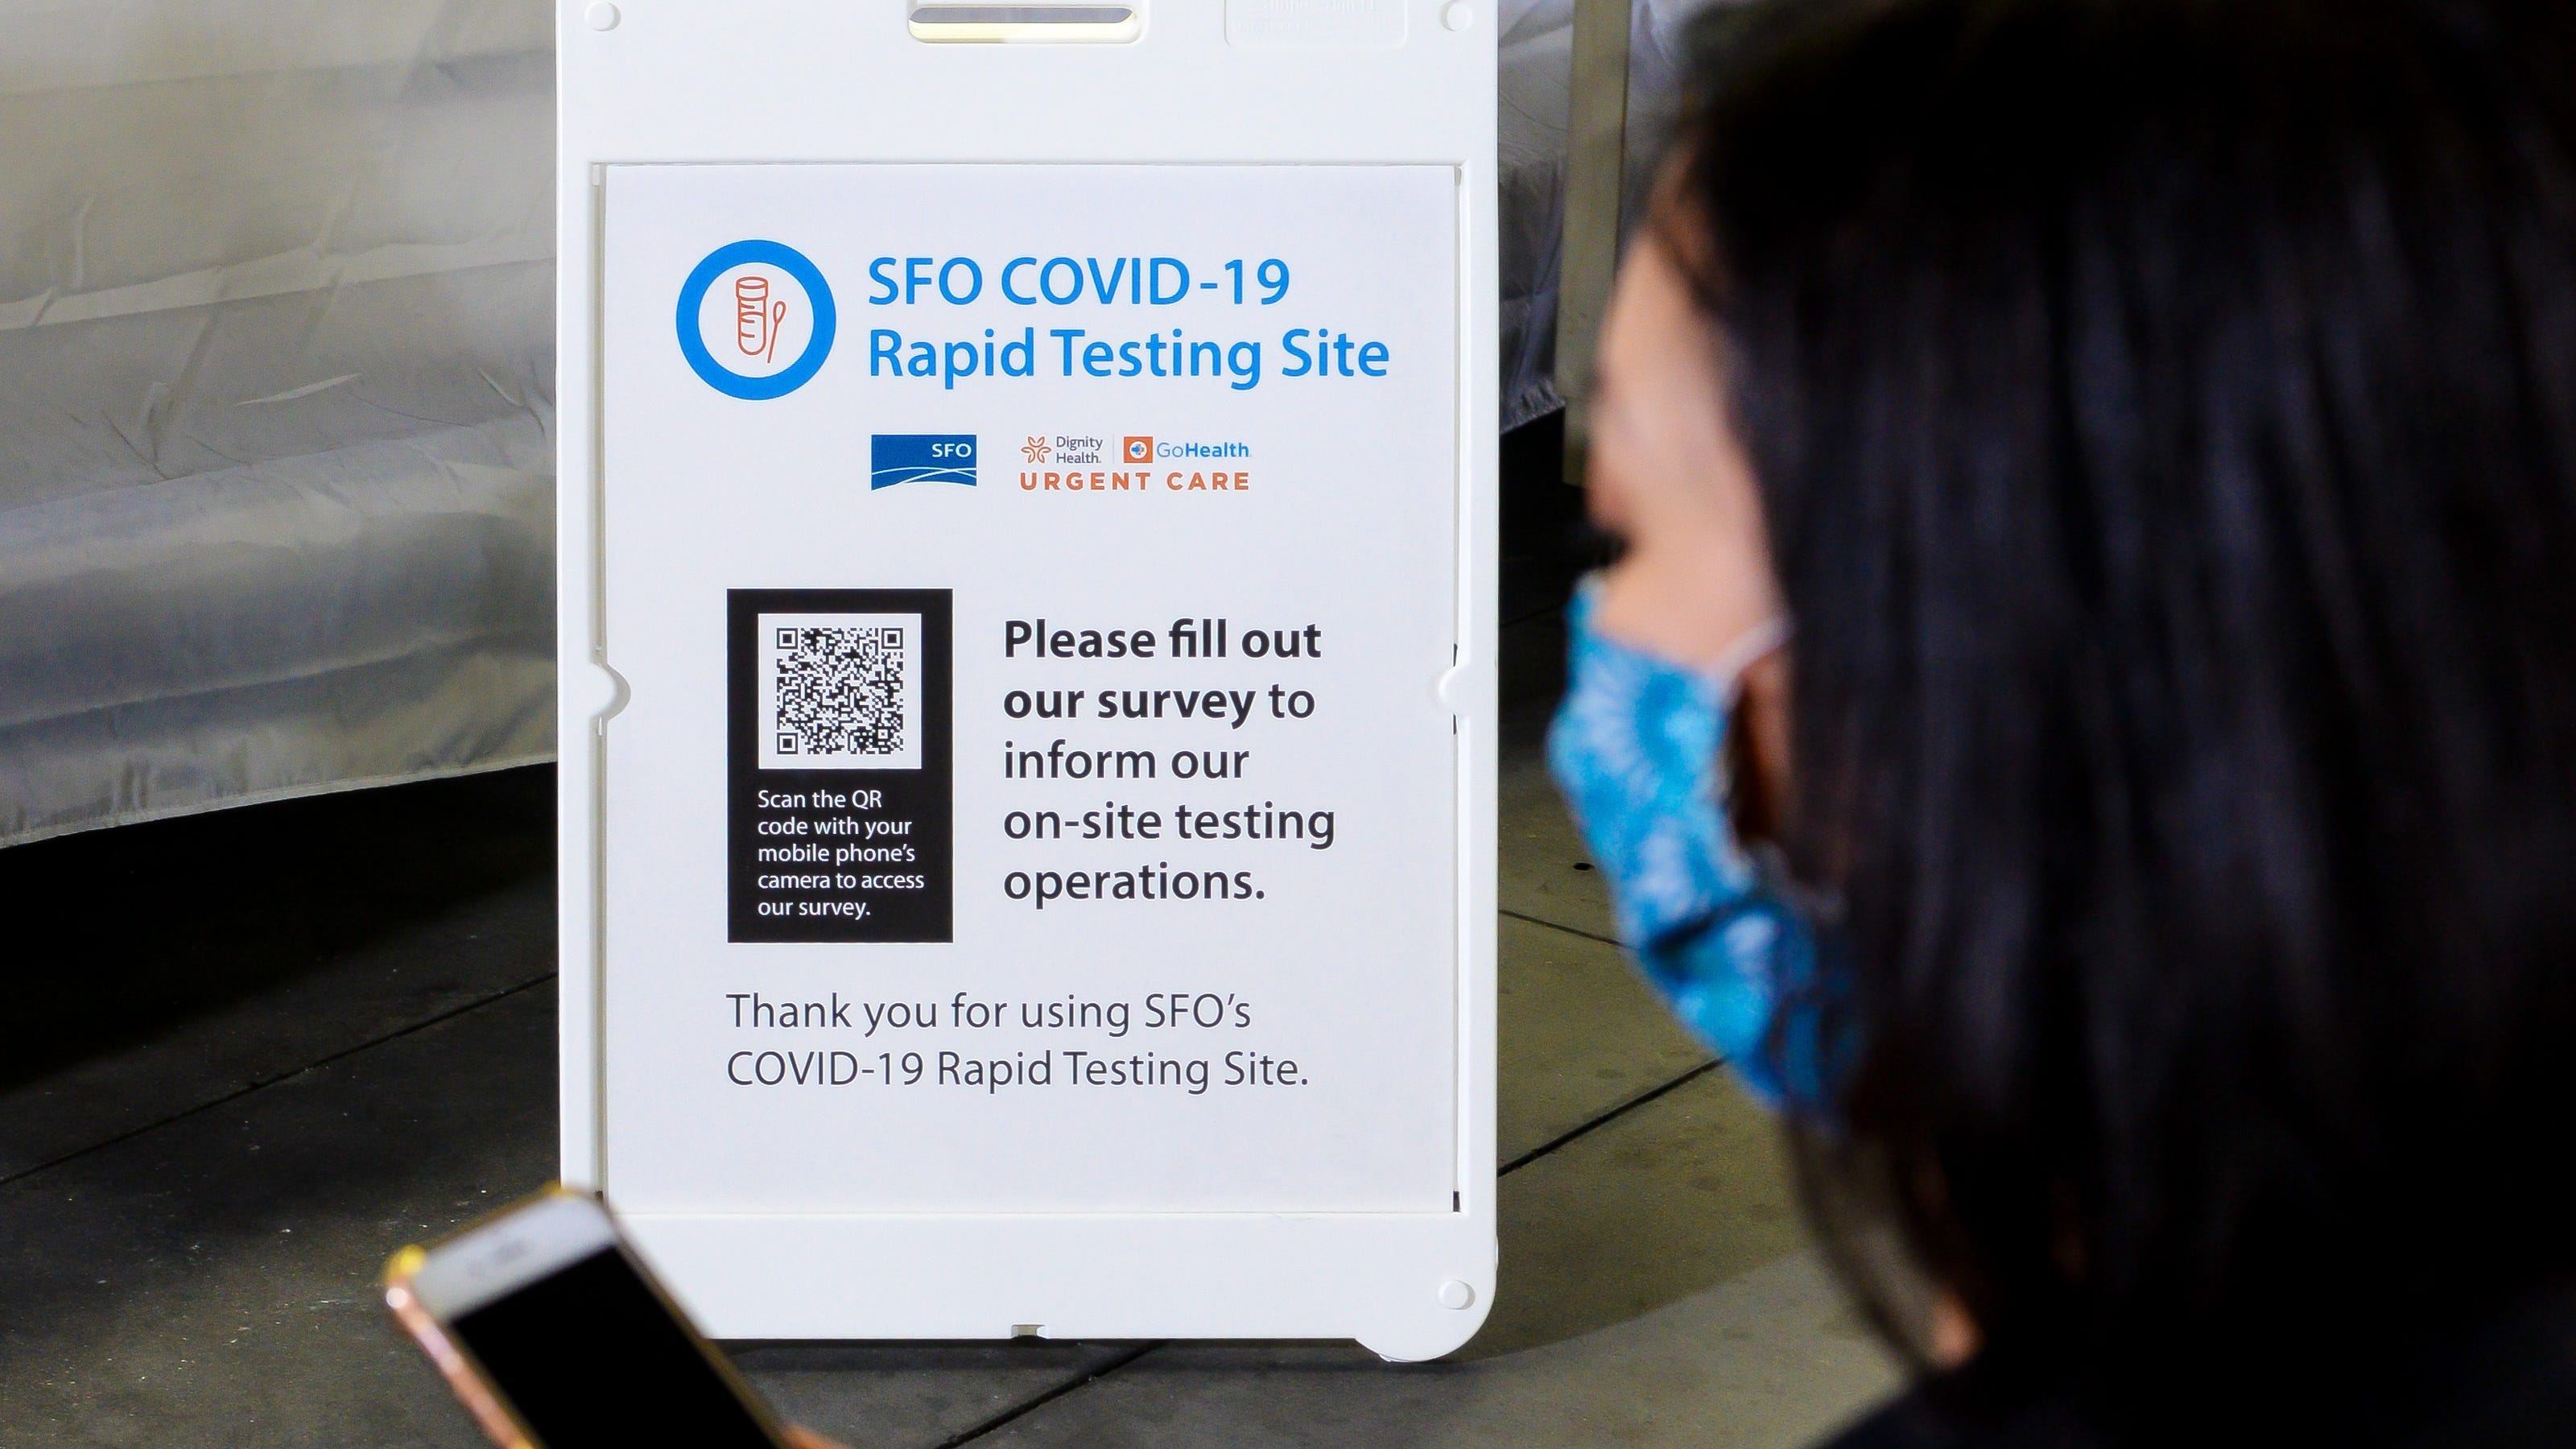 Best airport amenities COVID19 testing stations, outdoor lounges